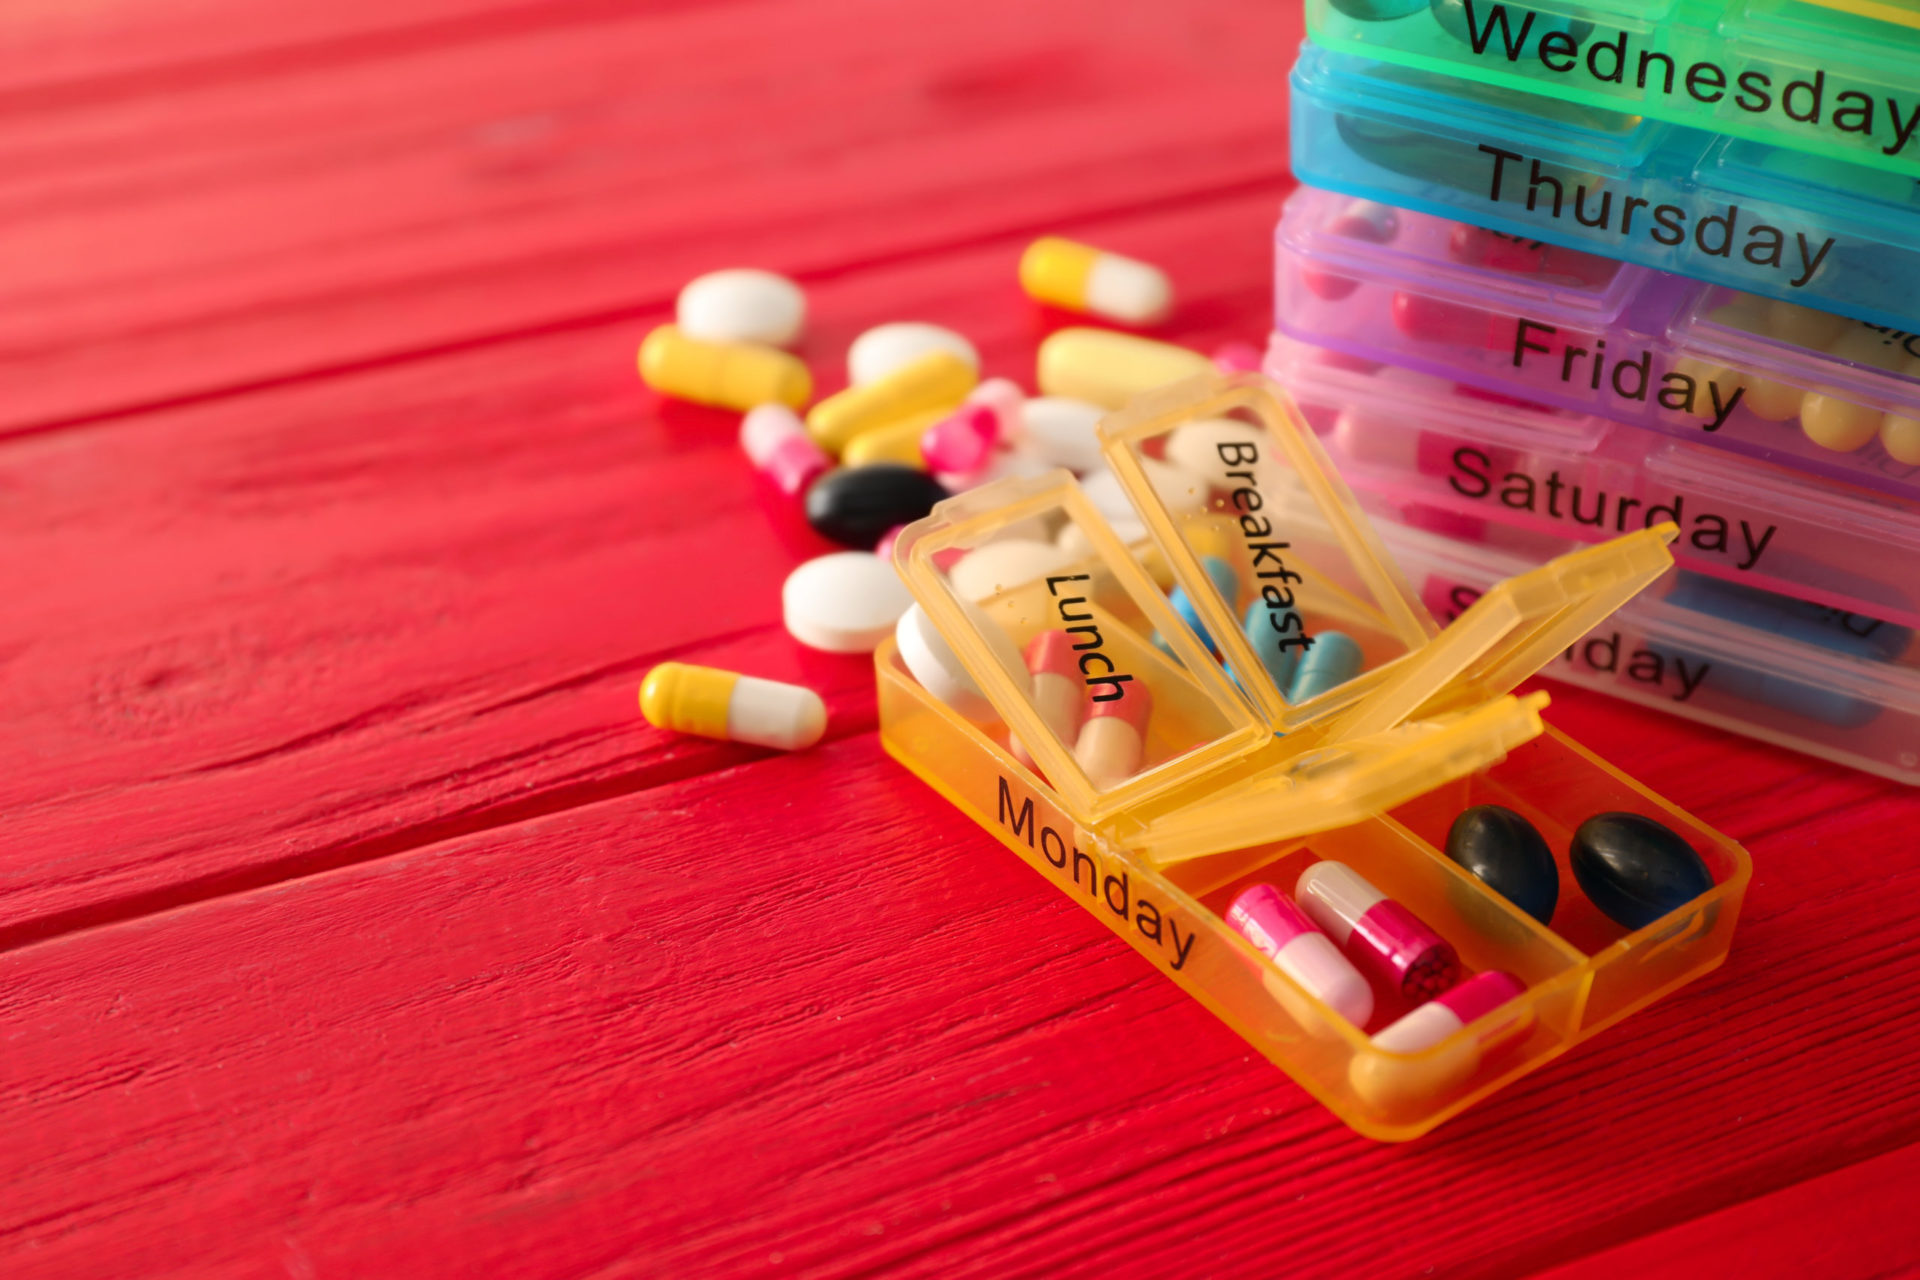 Pill containers for every day of the week containing pills